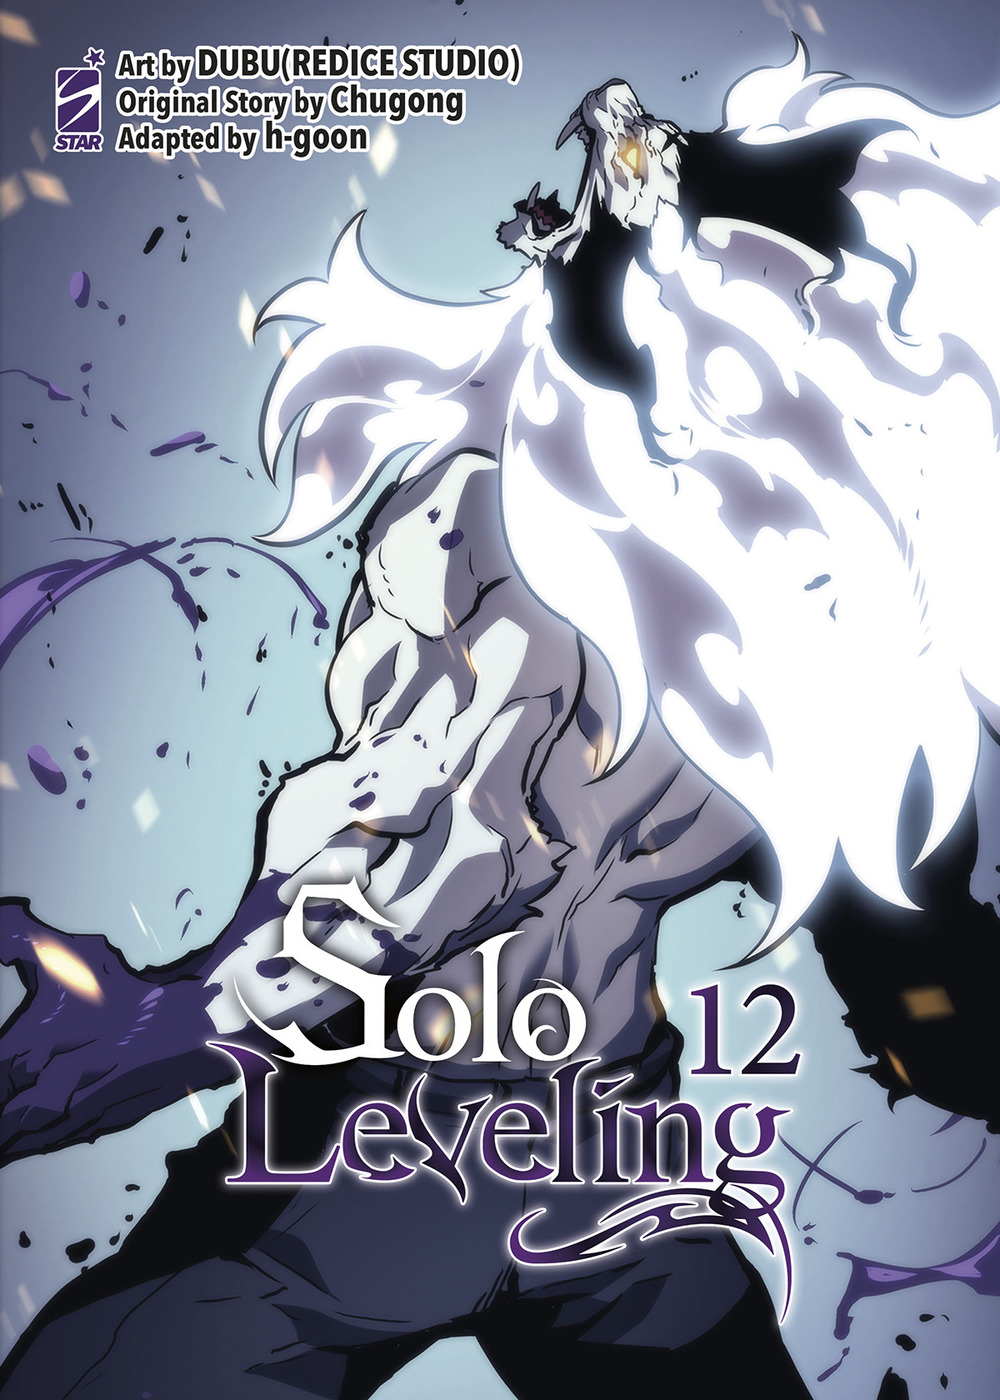 Solo leveling. Vol. 12